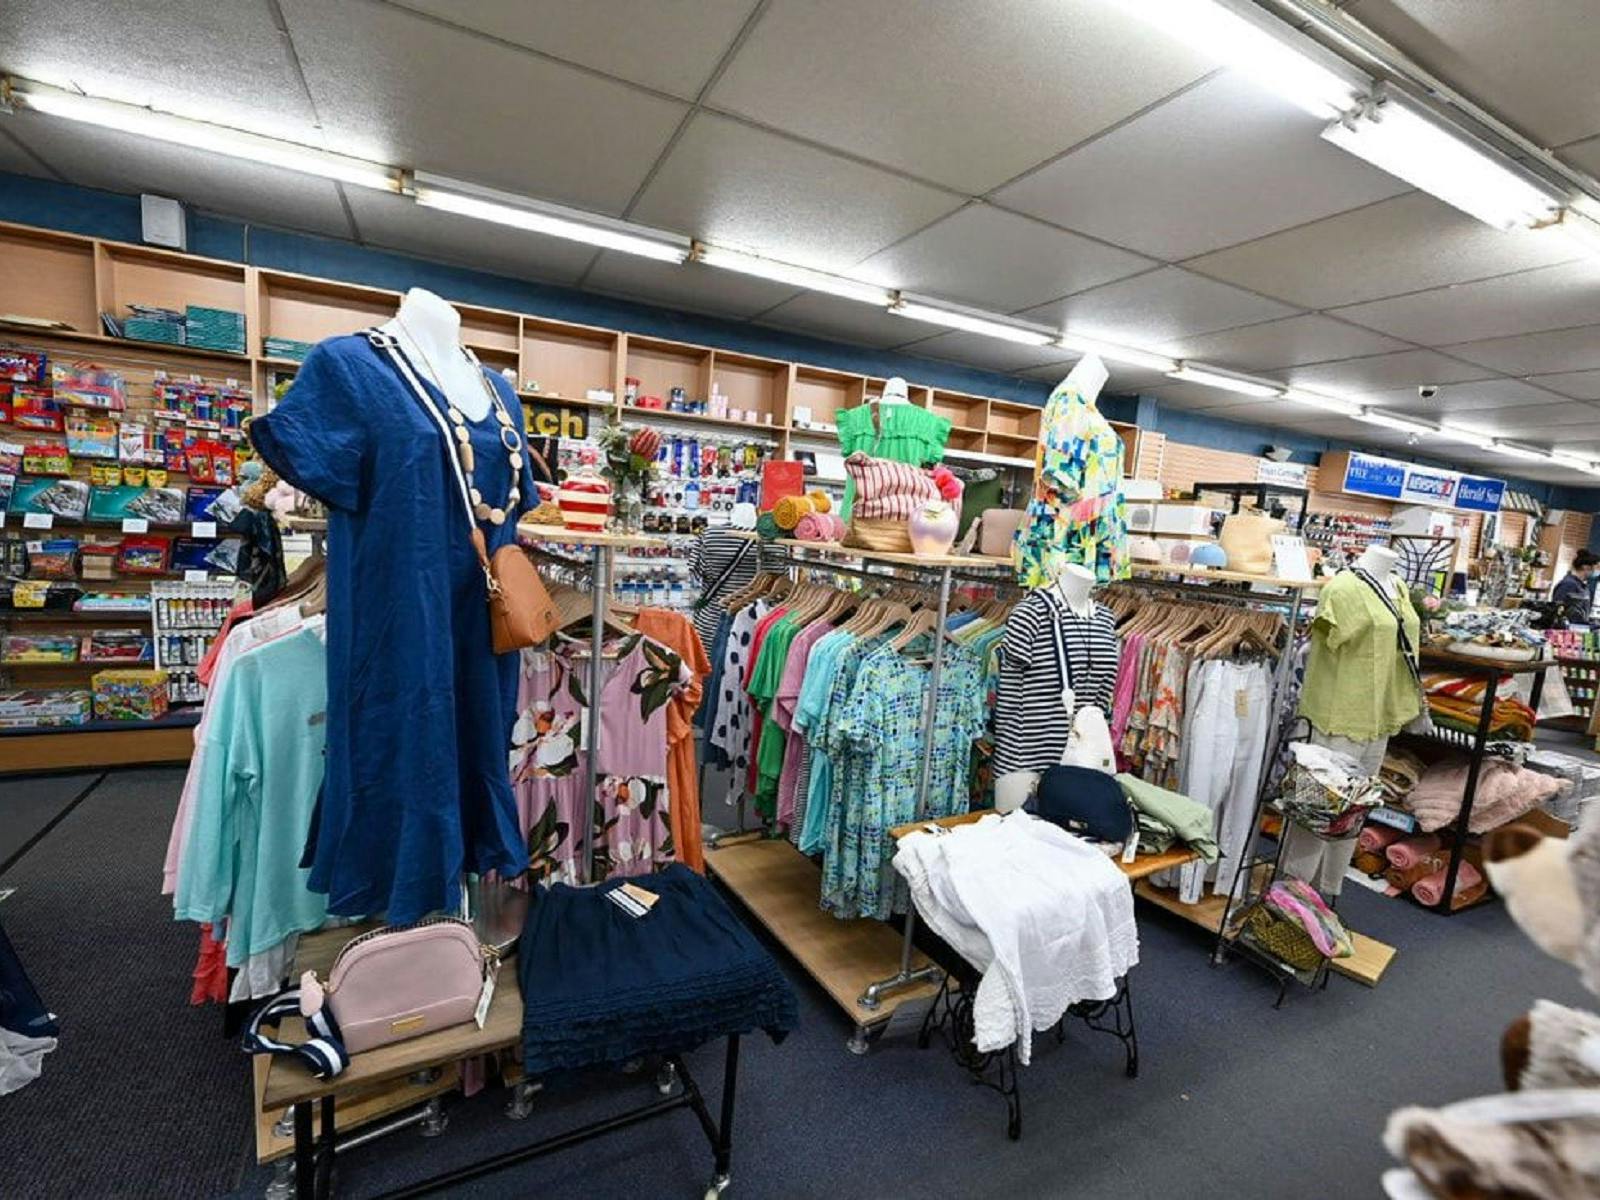 Variety of goods available to purchase inside the Benalla newagency